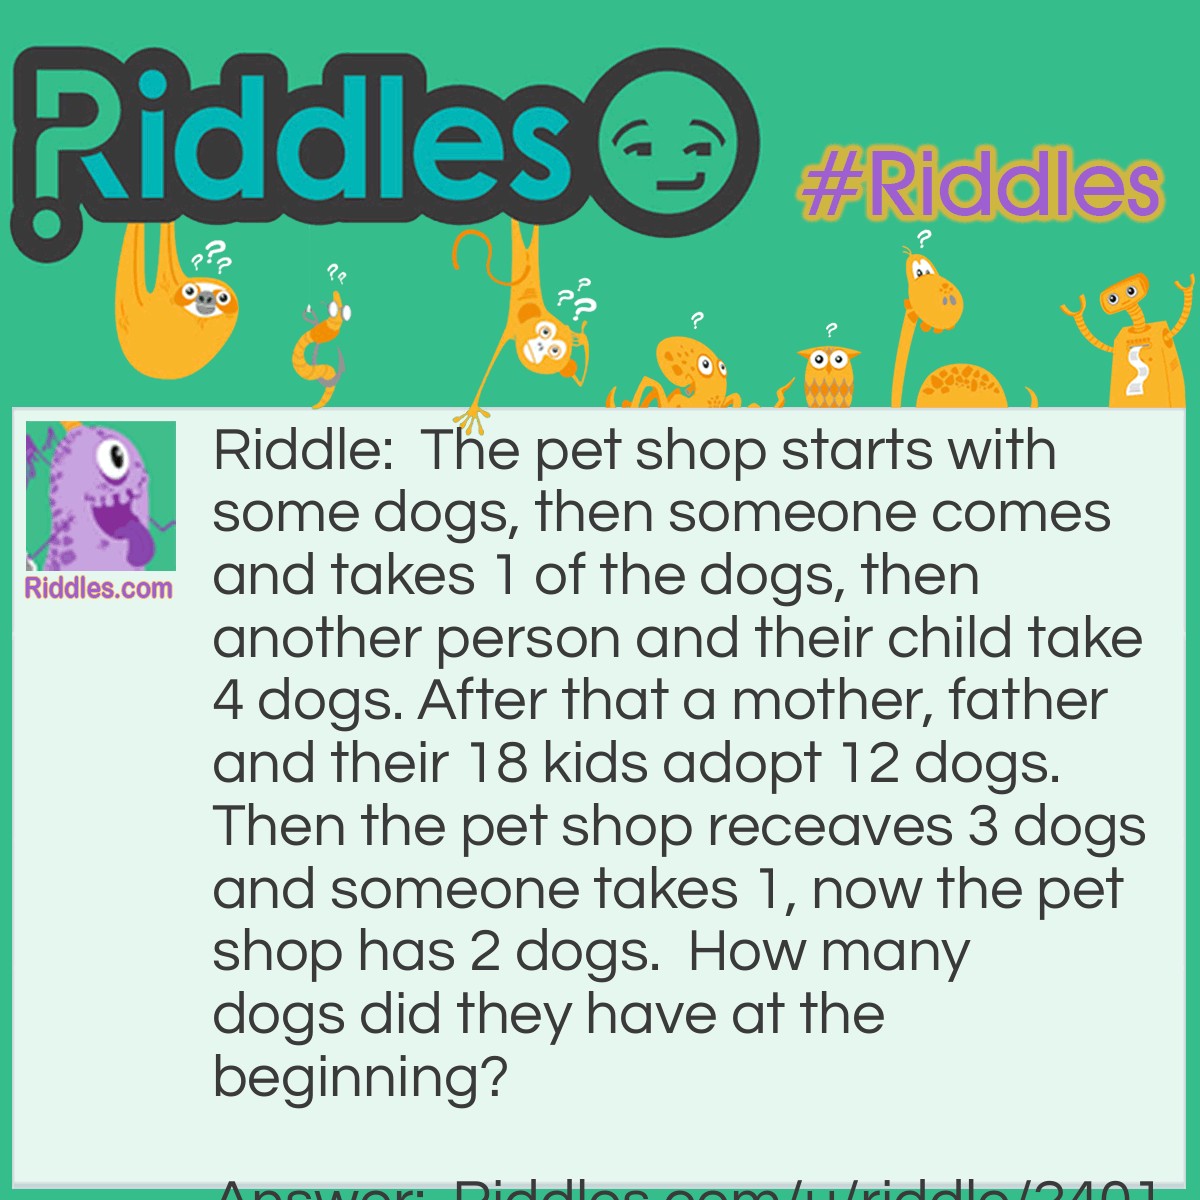 Riddle: The pet shop starts with some dogs, then someone comes and takes 1 of the dogs, then another person and their child take 4 dogs. After that a mother, father and their 18 kids adopt 12 dogs. Then the pet shop receaves 3 dogs and someone takes 1, now the pet shop has 2 dogs.  How many dogs did they have at the beginning? Answer: 17 dogs because 17-1=16-4=12-12=0+3=3-1=2.